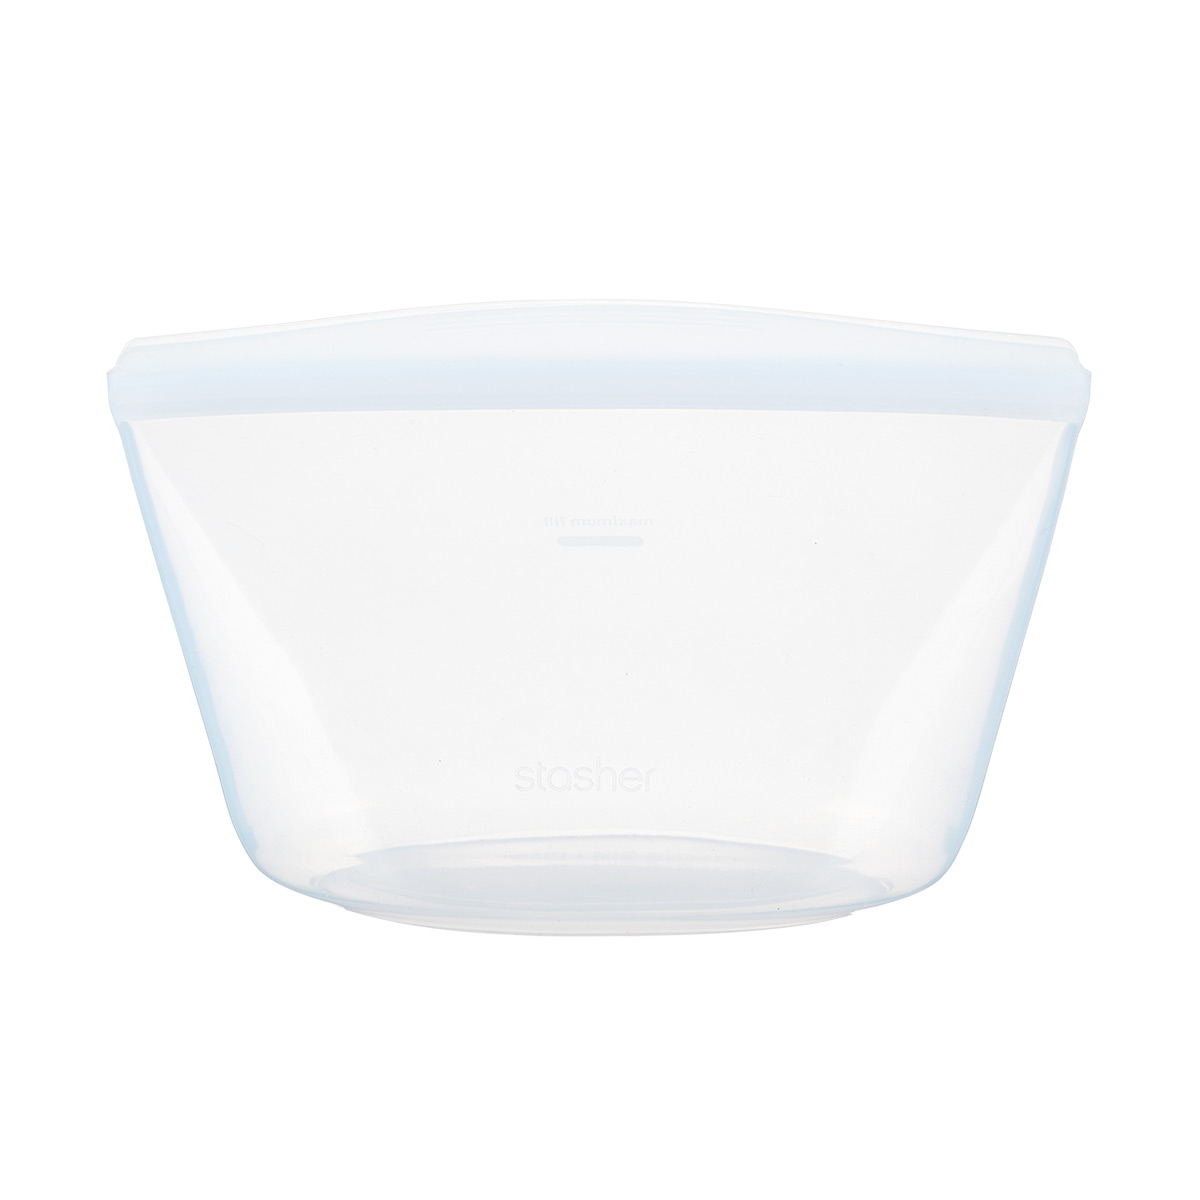 https://www.containerstore.com/catalogimages/474244/10091992-stasher-4-cup-silicone-reus.jpg